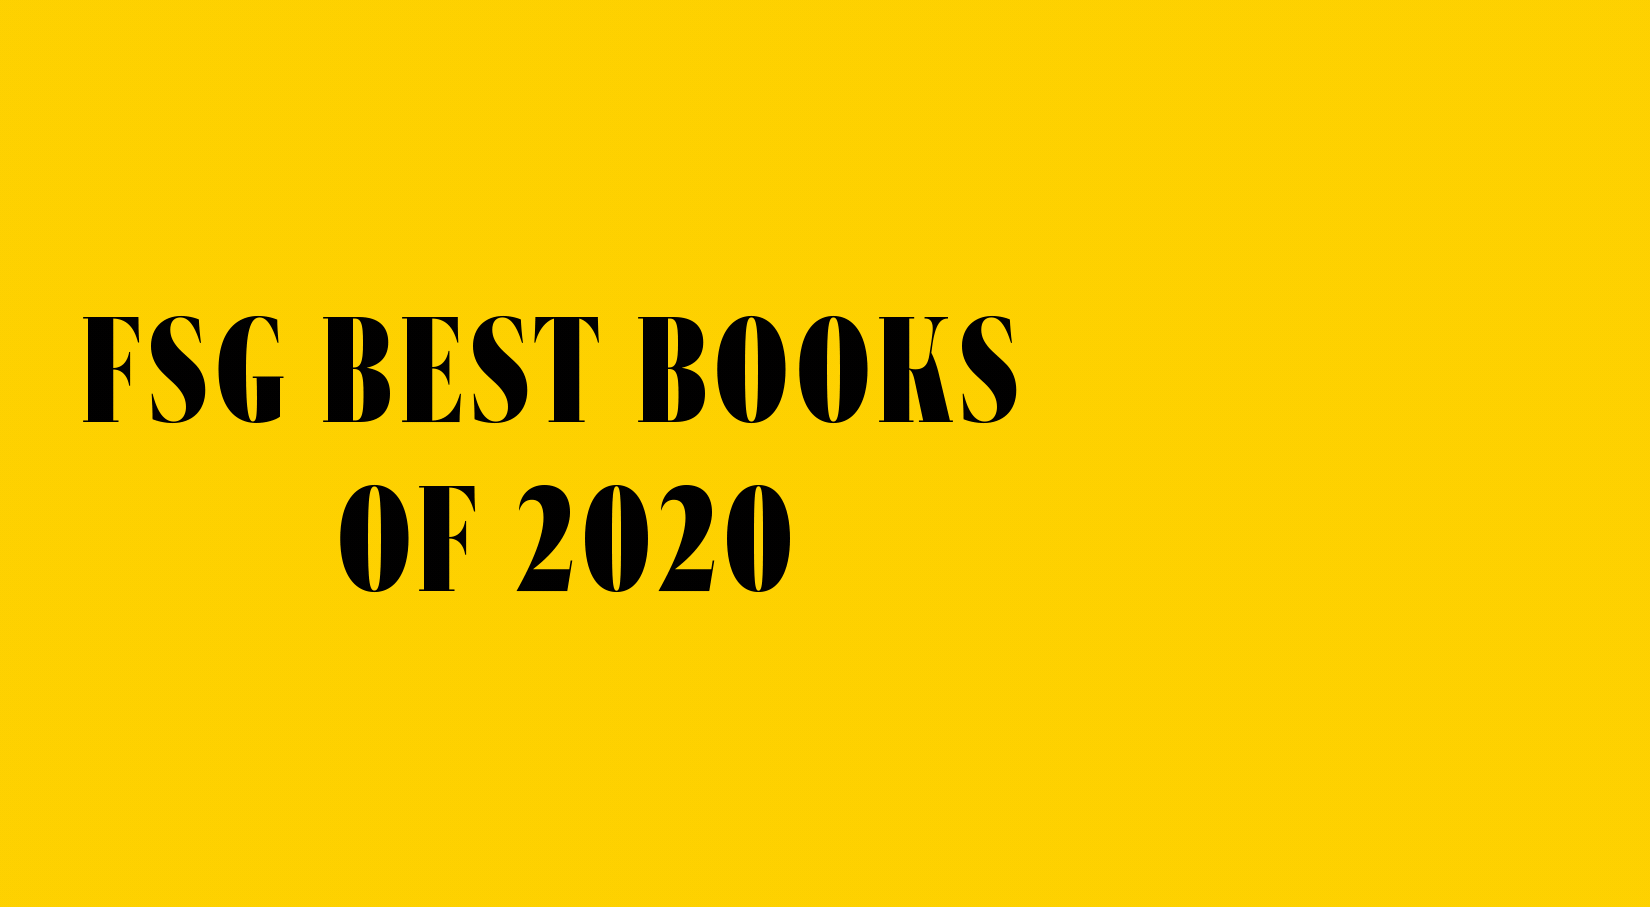 fsg s best books of 2020 work in progress awesome animated gifs moving for job